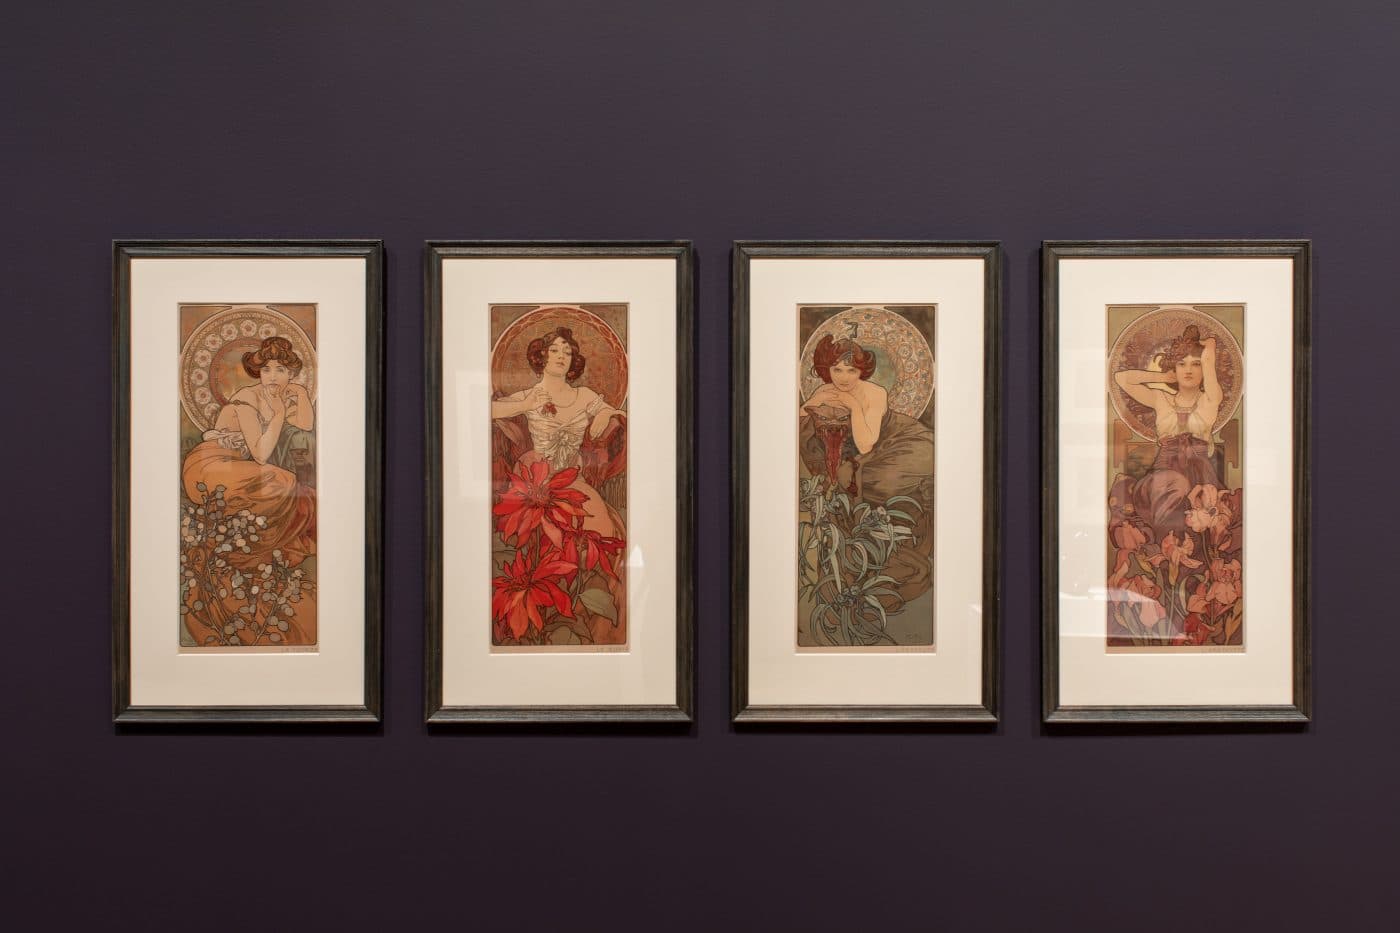 A series of works representing precious gemstones by Alphonse Mucha